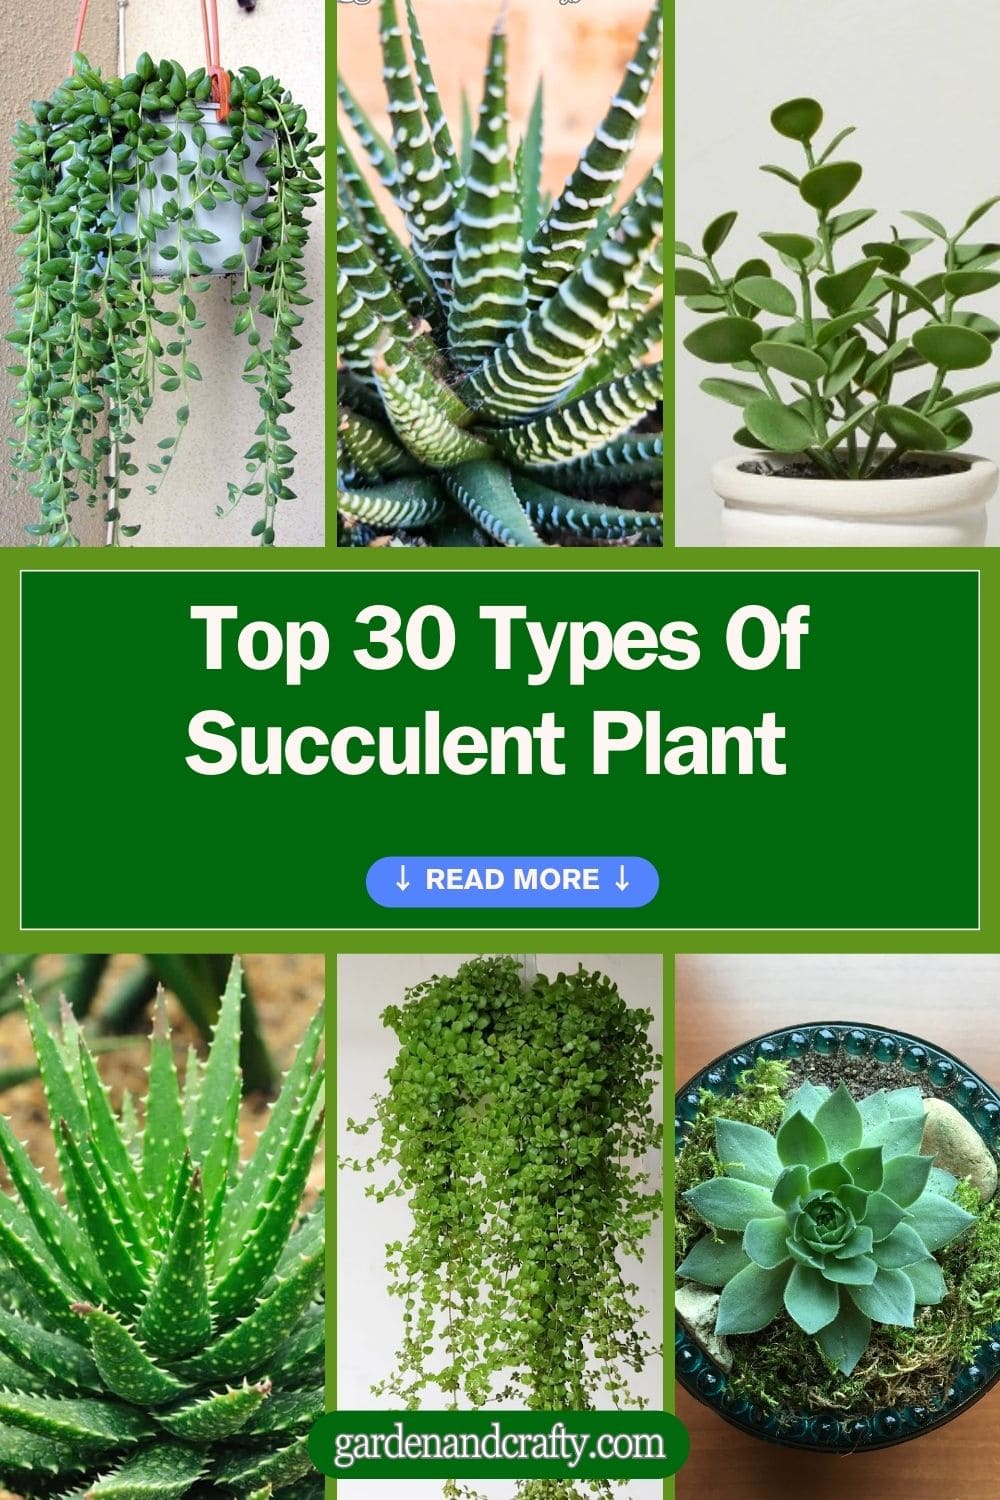 Top 30 Types Of Succulent Plant With Pictures And Names